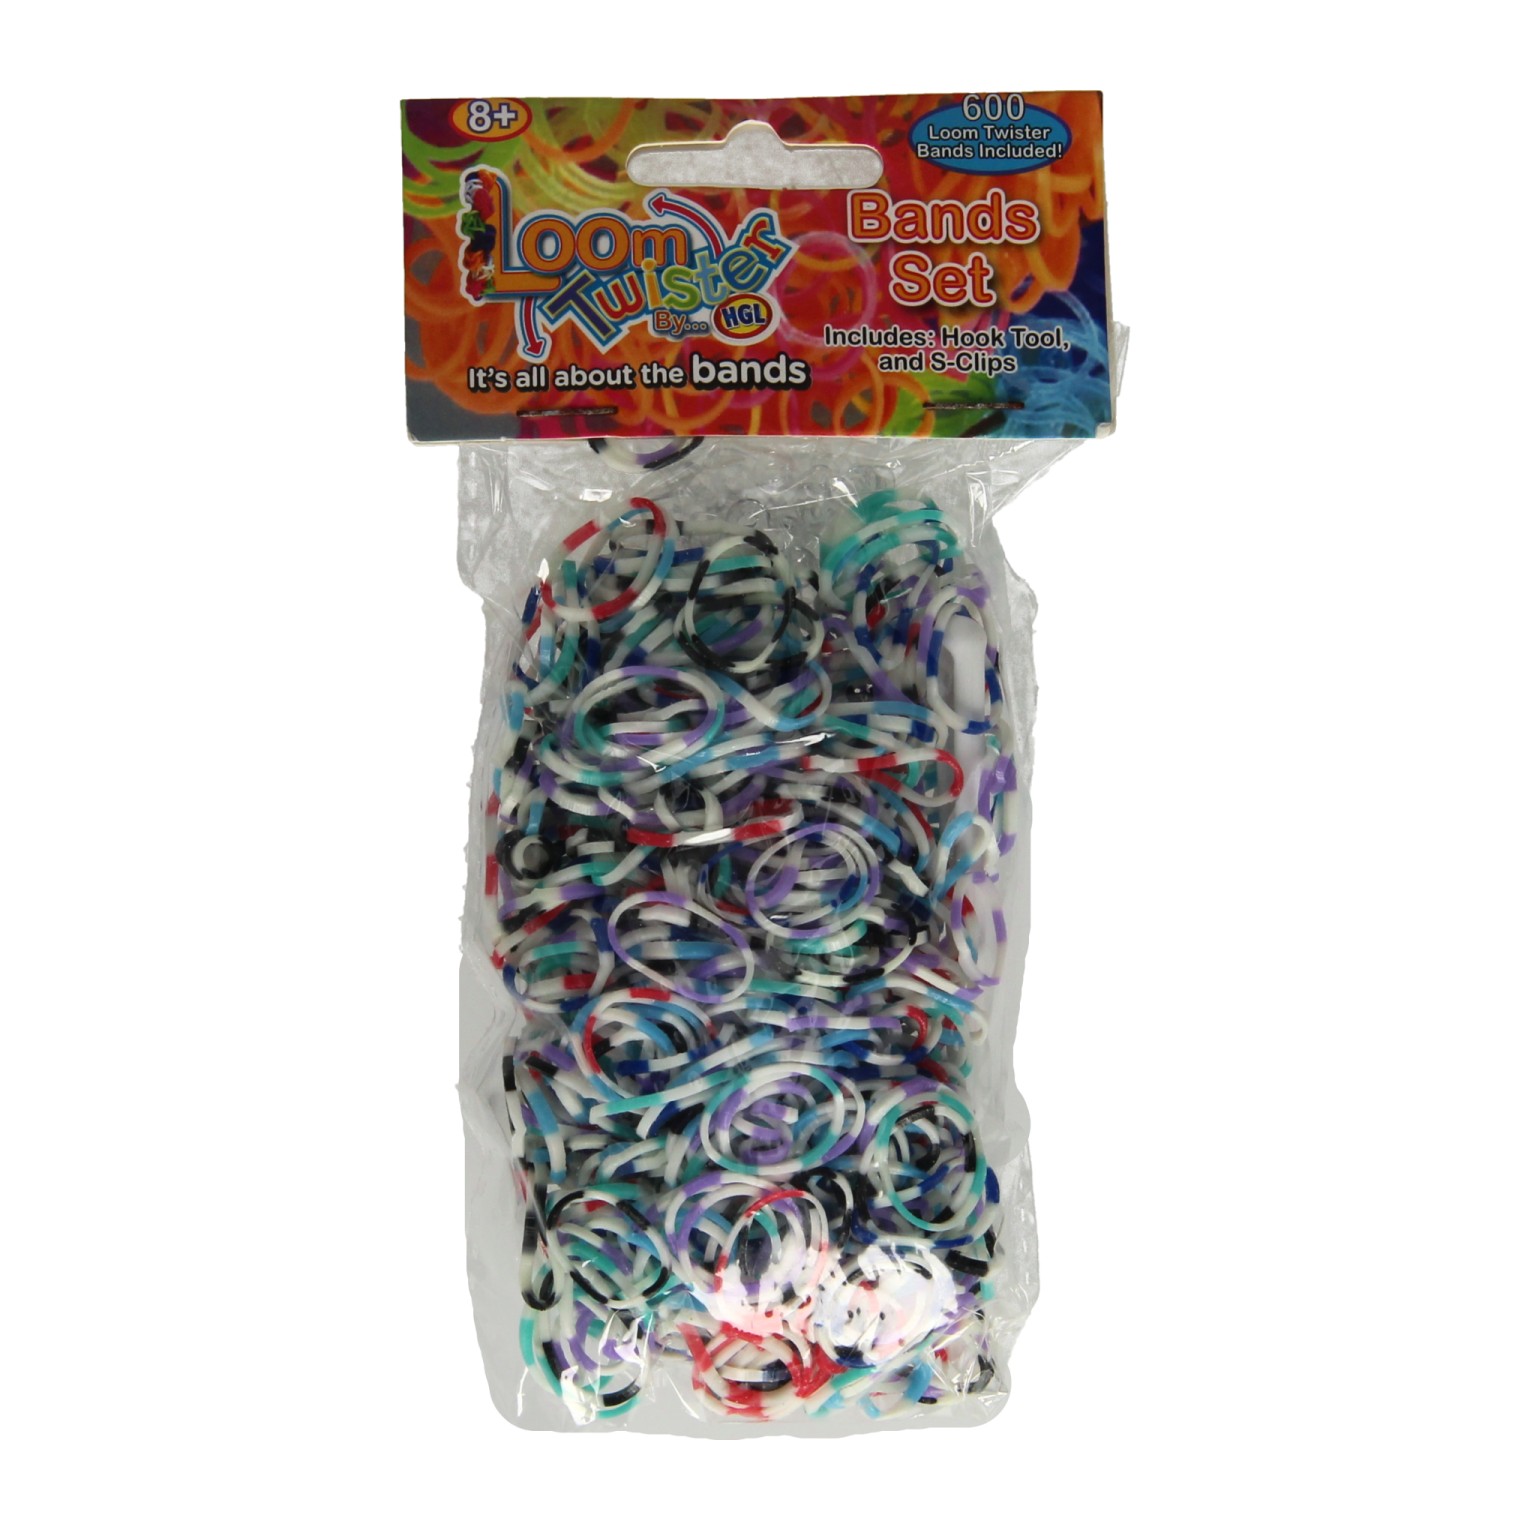 RAINBOW LOOM MIXED COLOR BANDS, 600/PACK